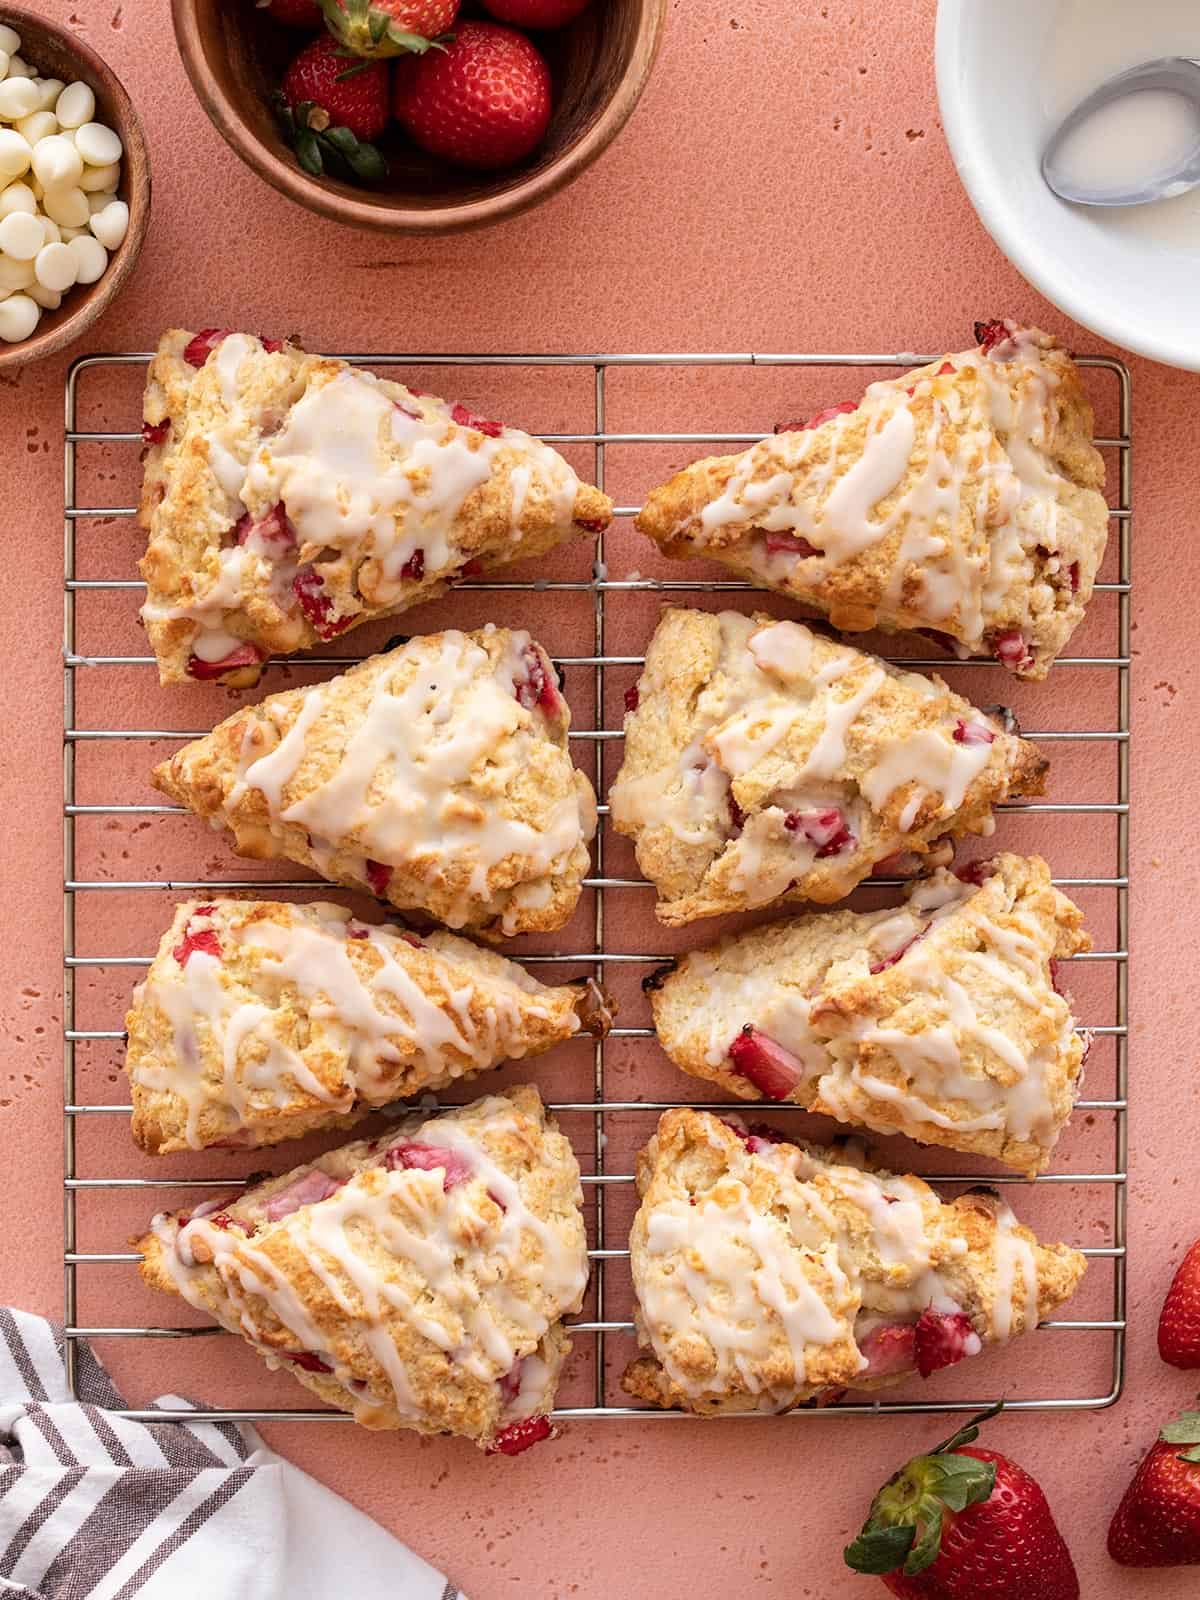 Strawberry scones on a wire cooling rack from above